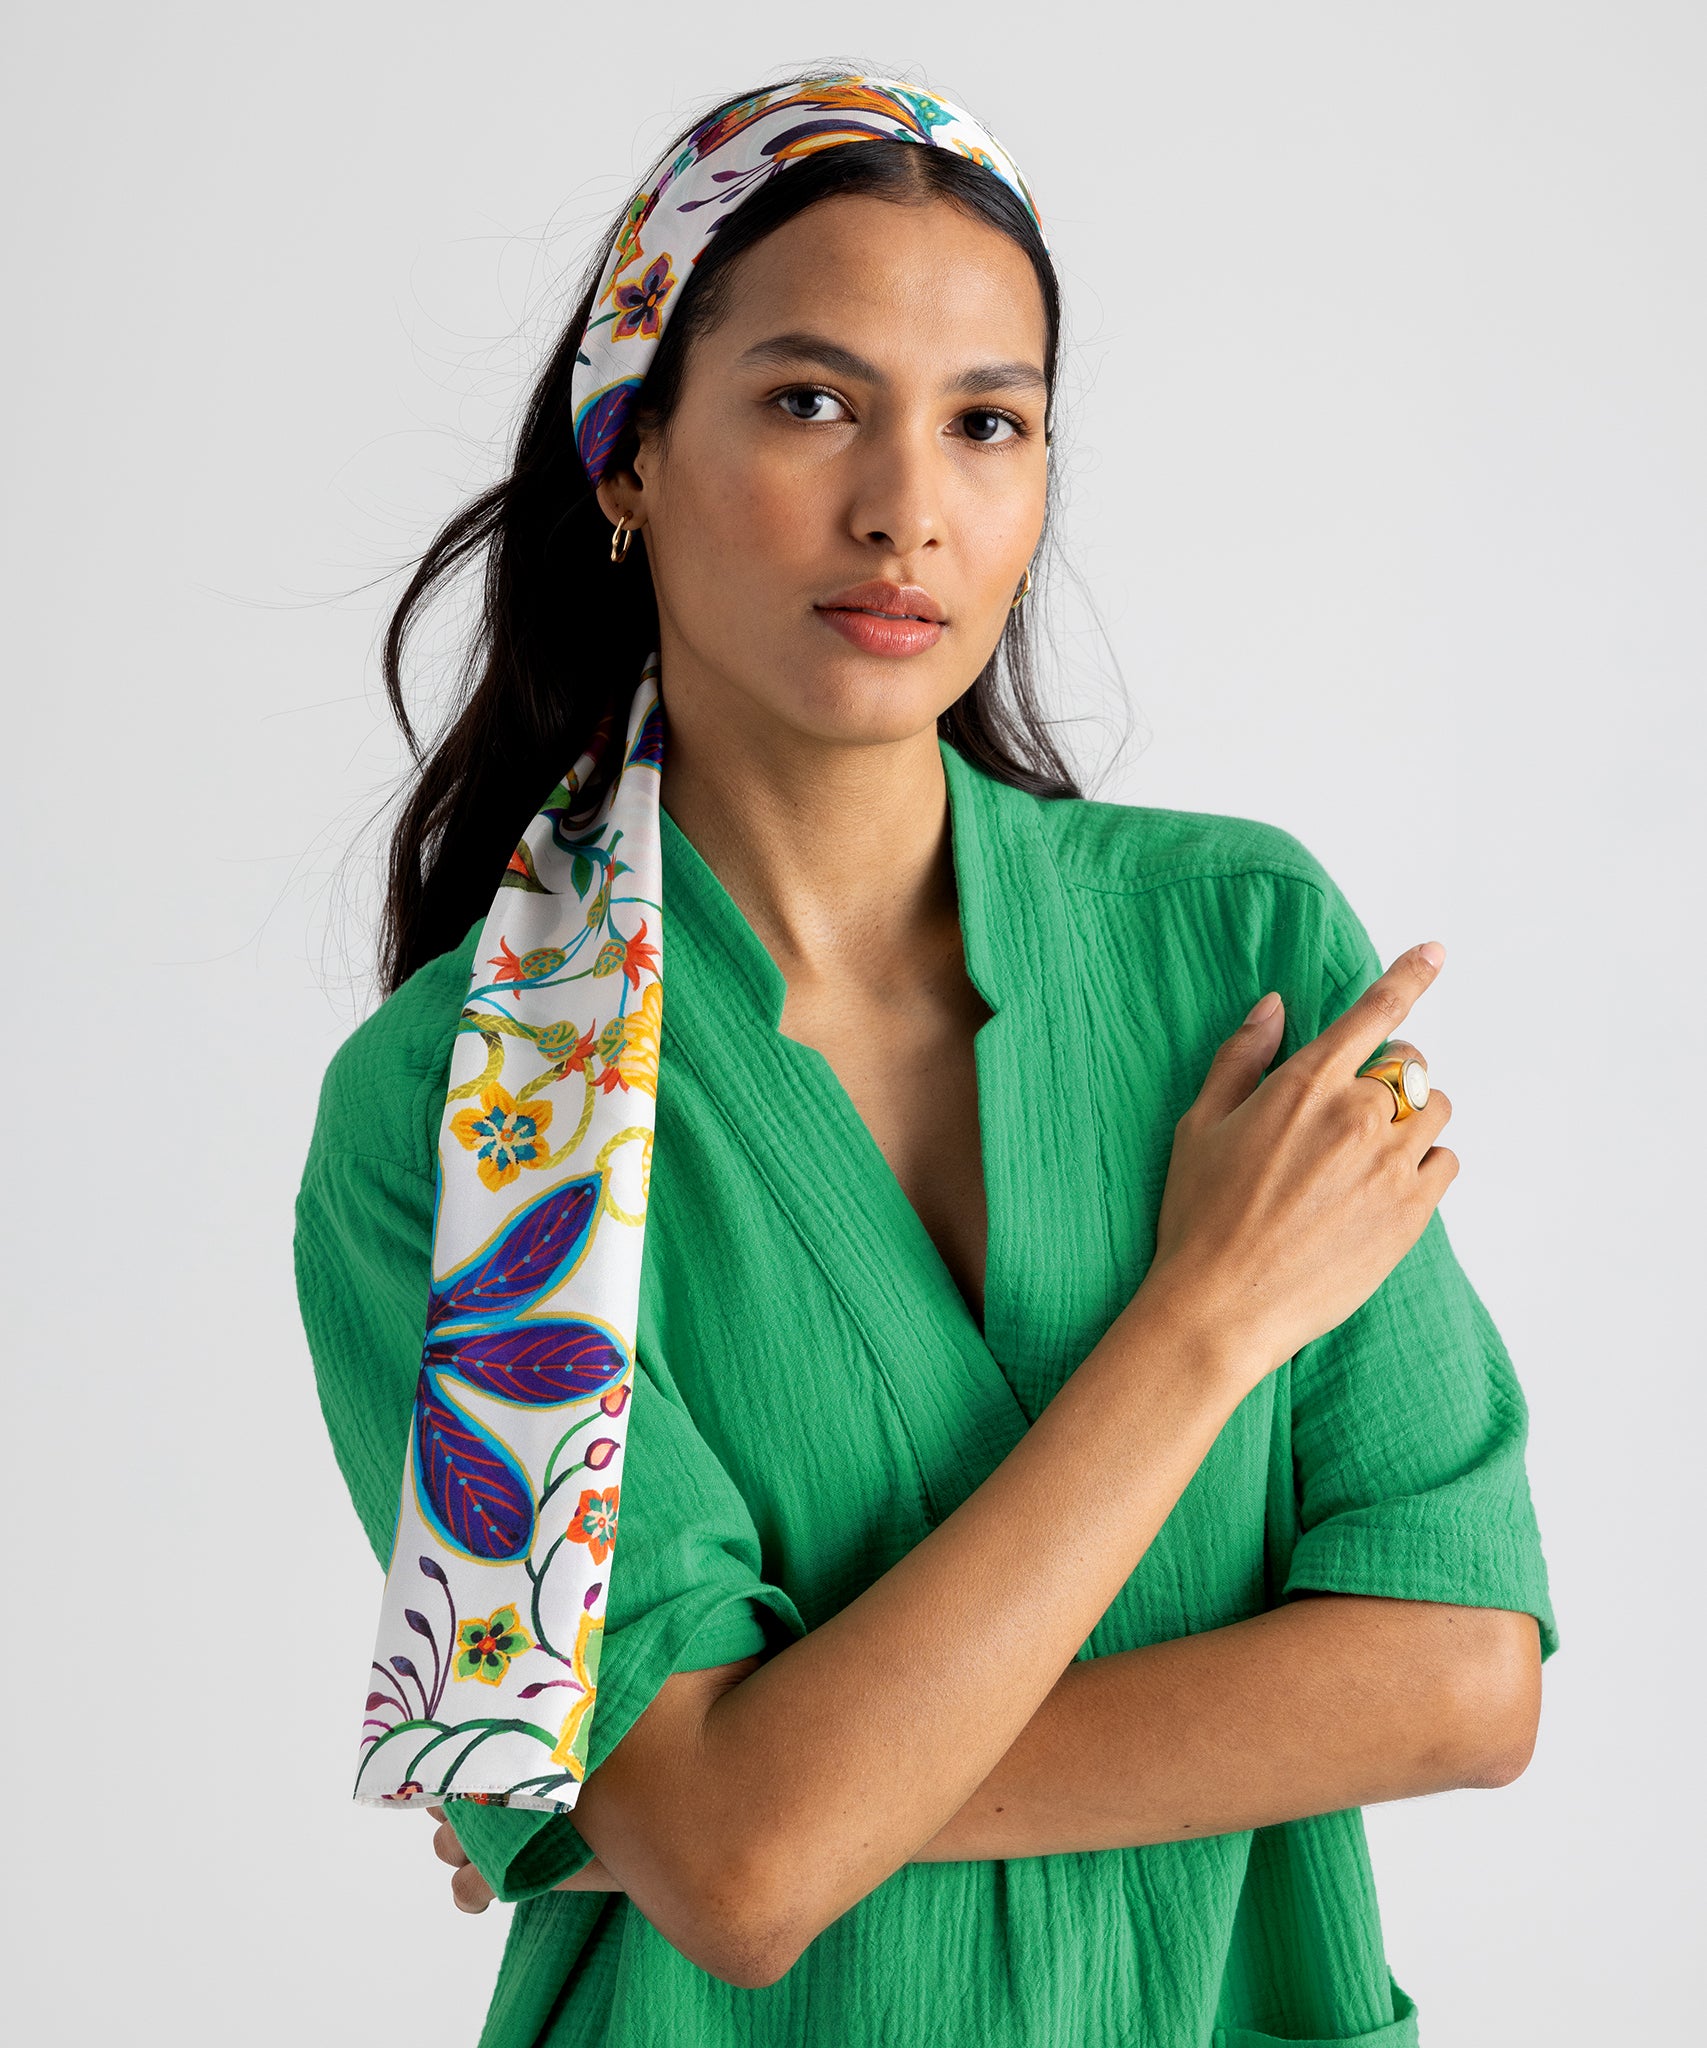 Buy ONE ECHELON Satin Silk Scarf for Women Lightweight Fashion Scarves,  Wrap in Floral Pattern for Spring Fall Summer (Black and Green) at